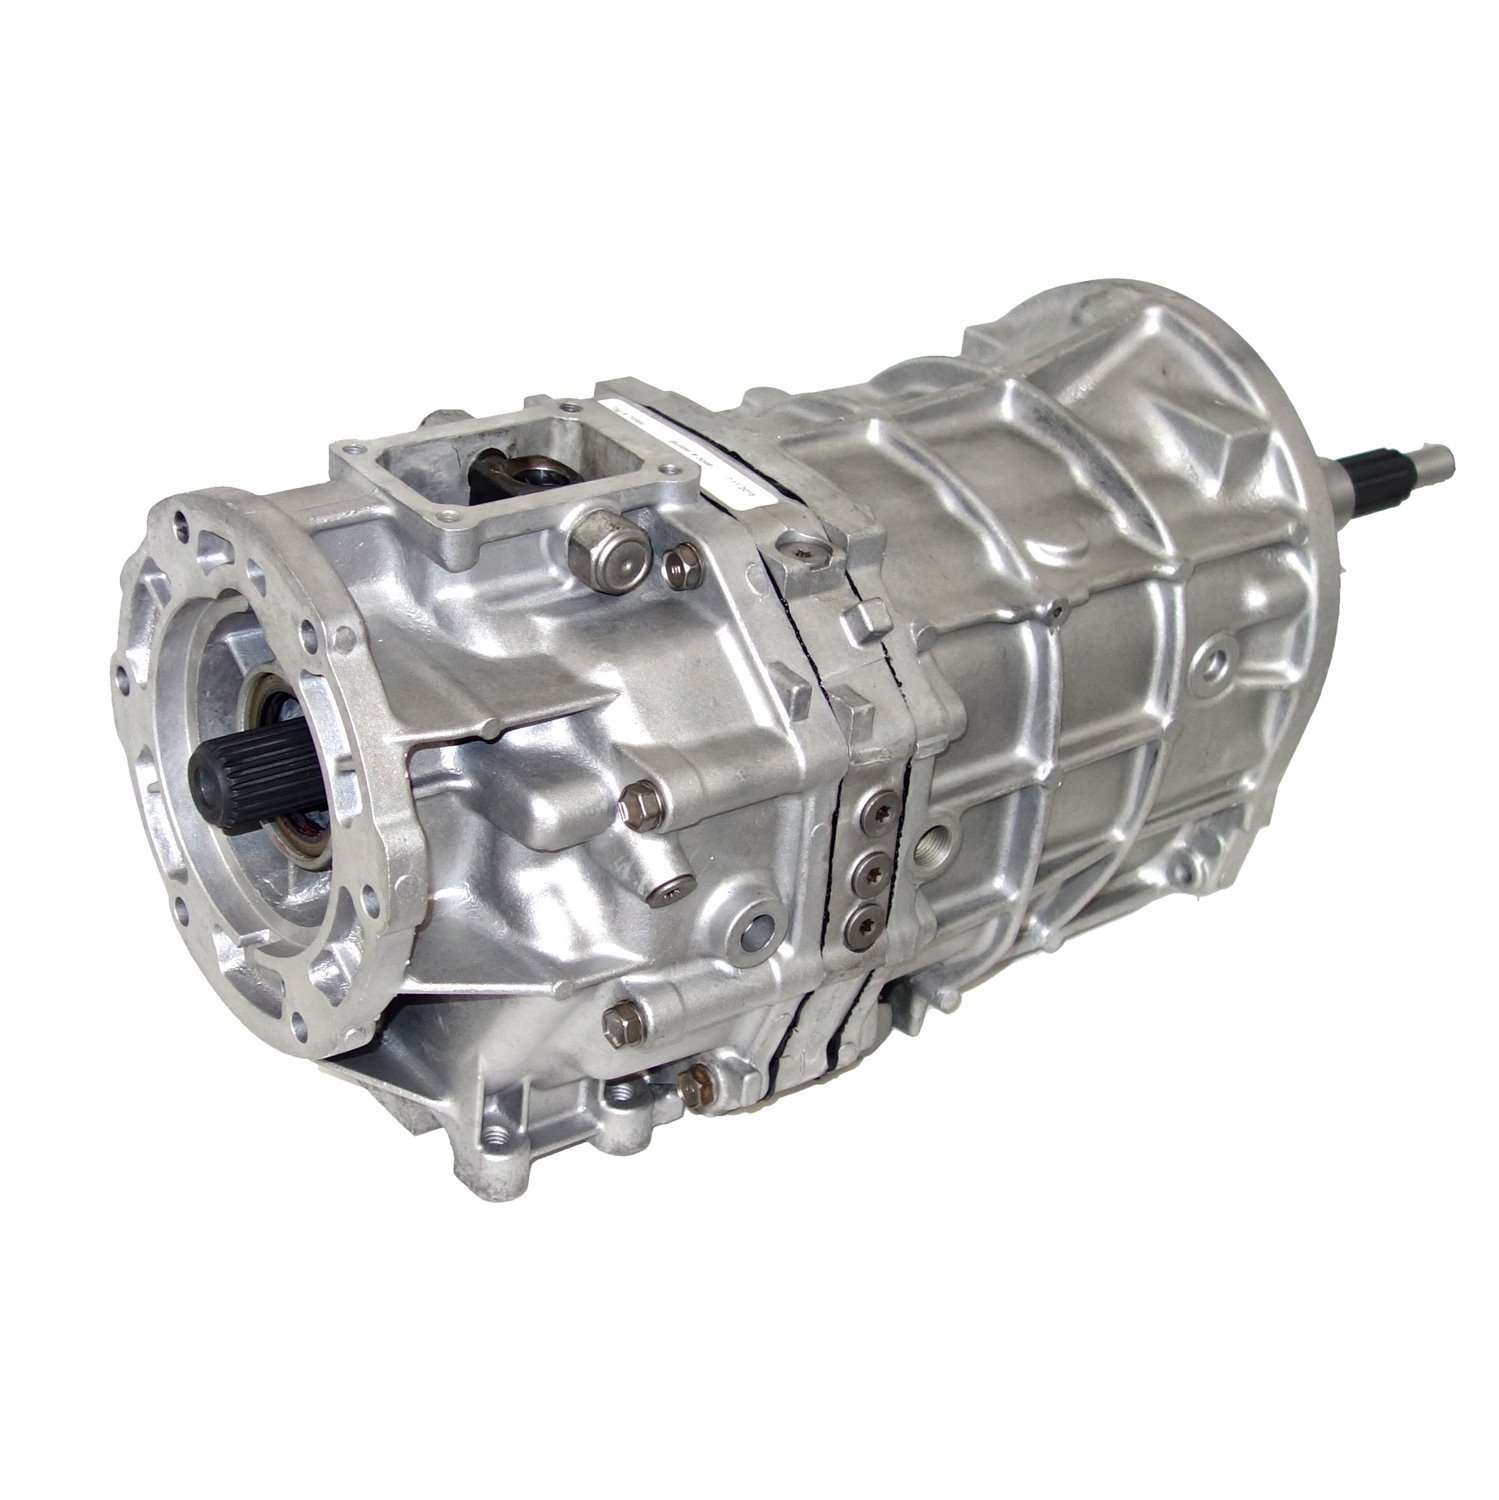 Remanufactured AX15 Manual Transmission for Jeep 87-91 Cherokee, 5 Speed